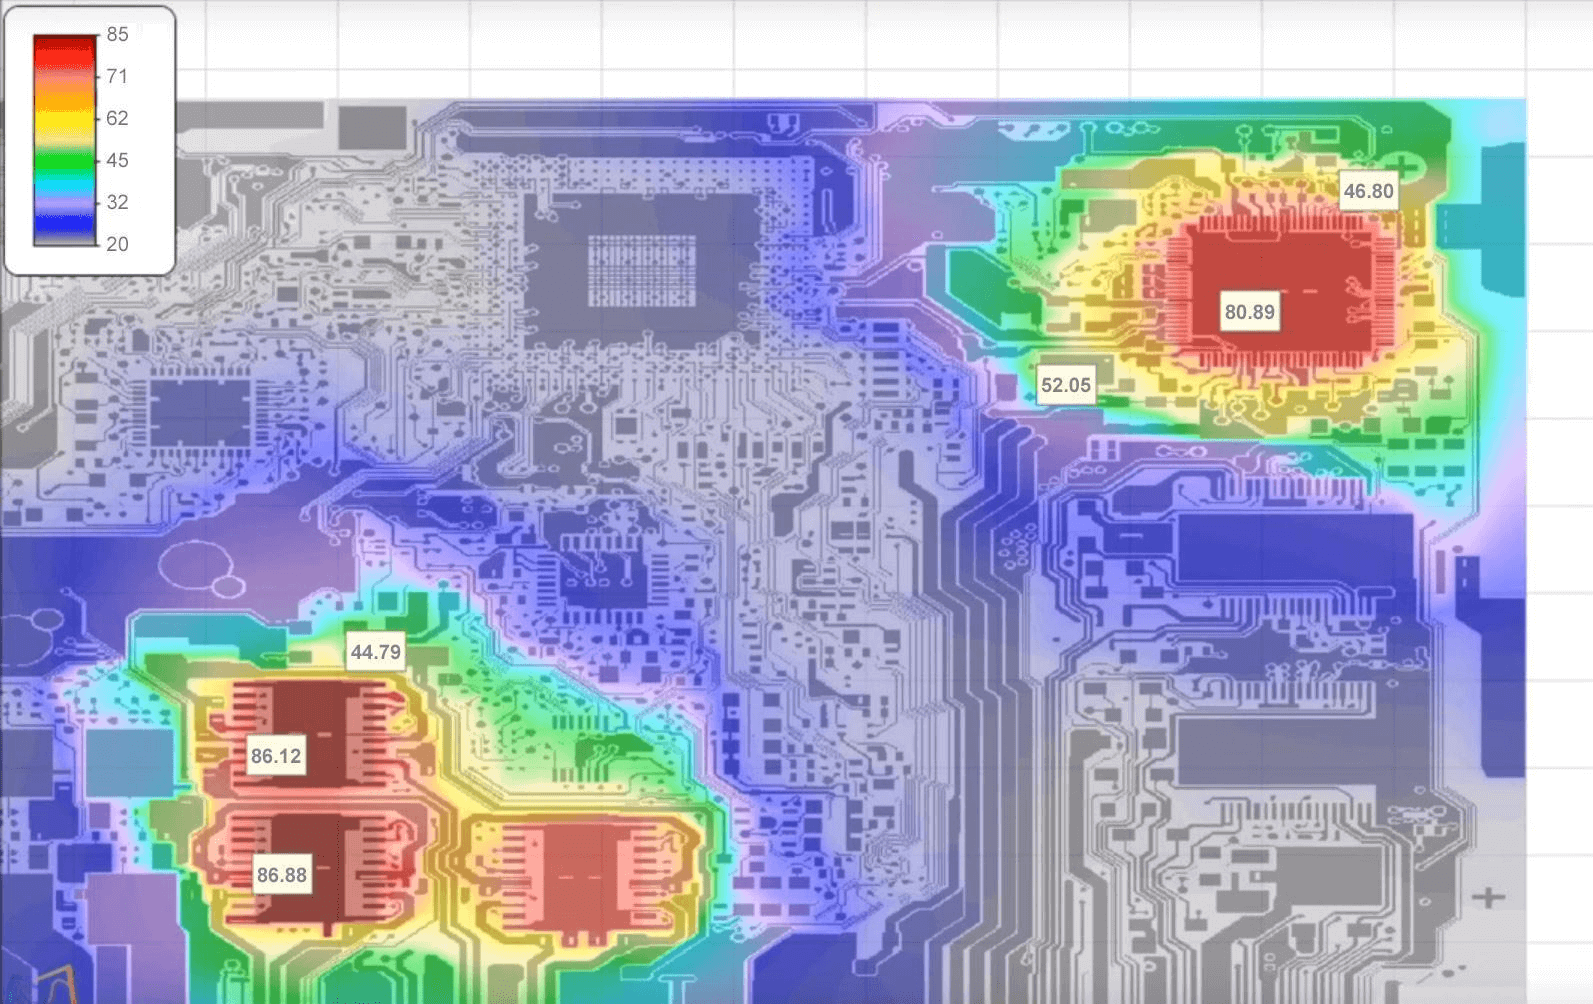 Visualizing PCB Thermal Distribution: Red-hot center surrounded by cooler areas, showcasing meticulously organized layout and logical component grouping.